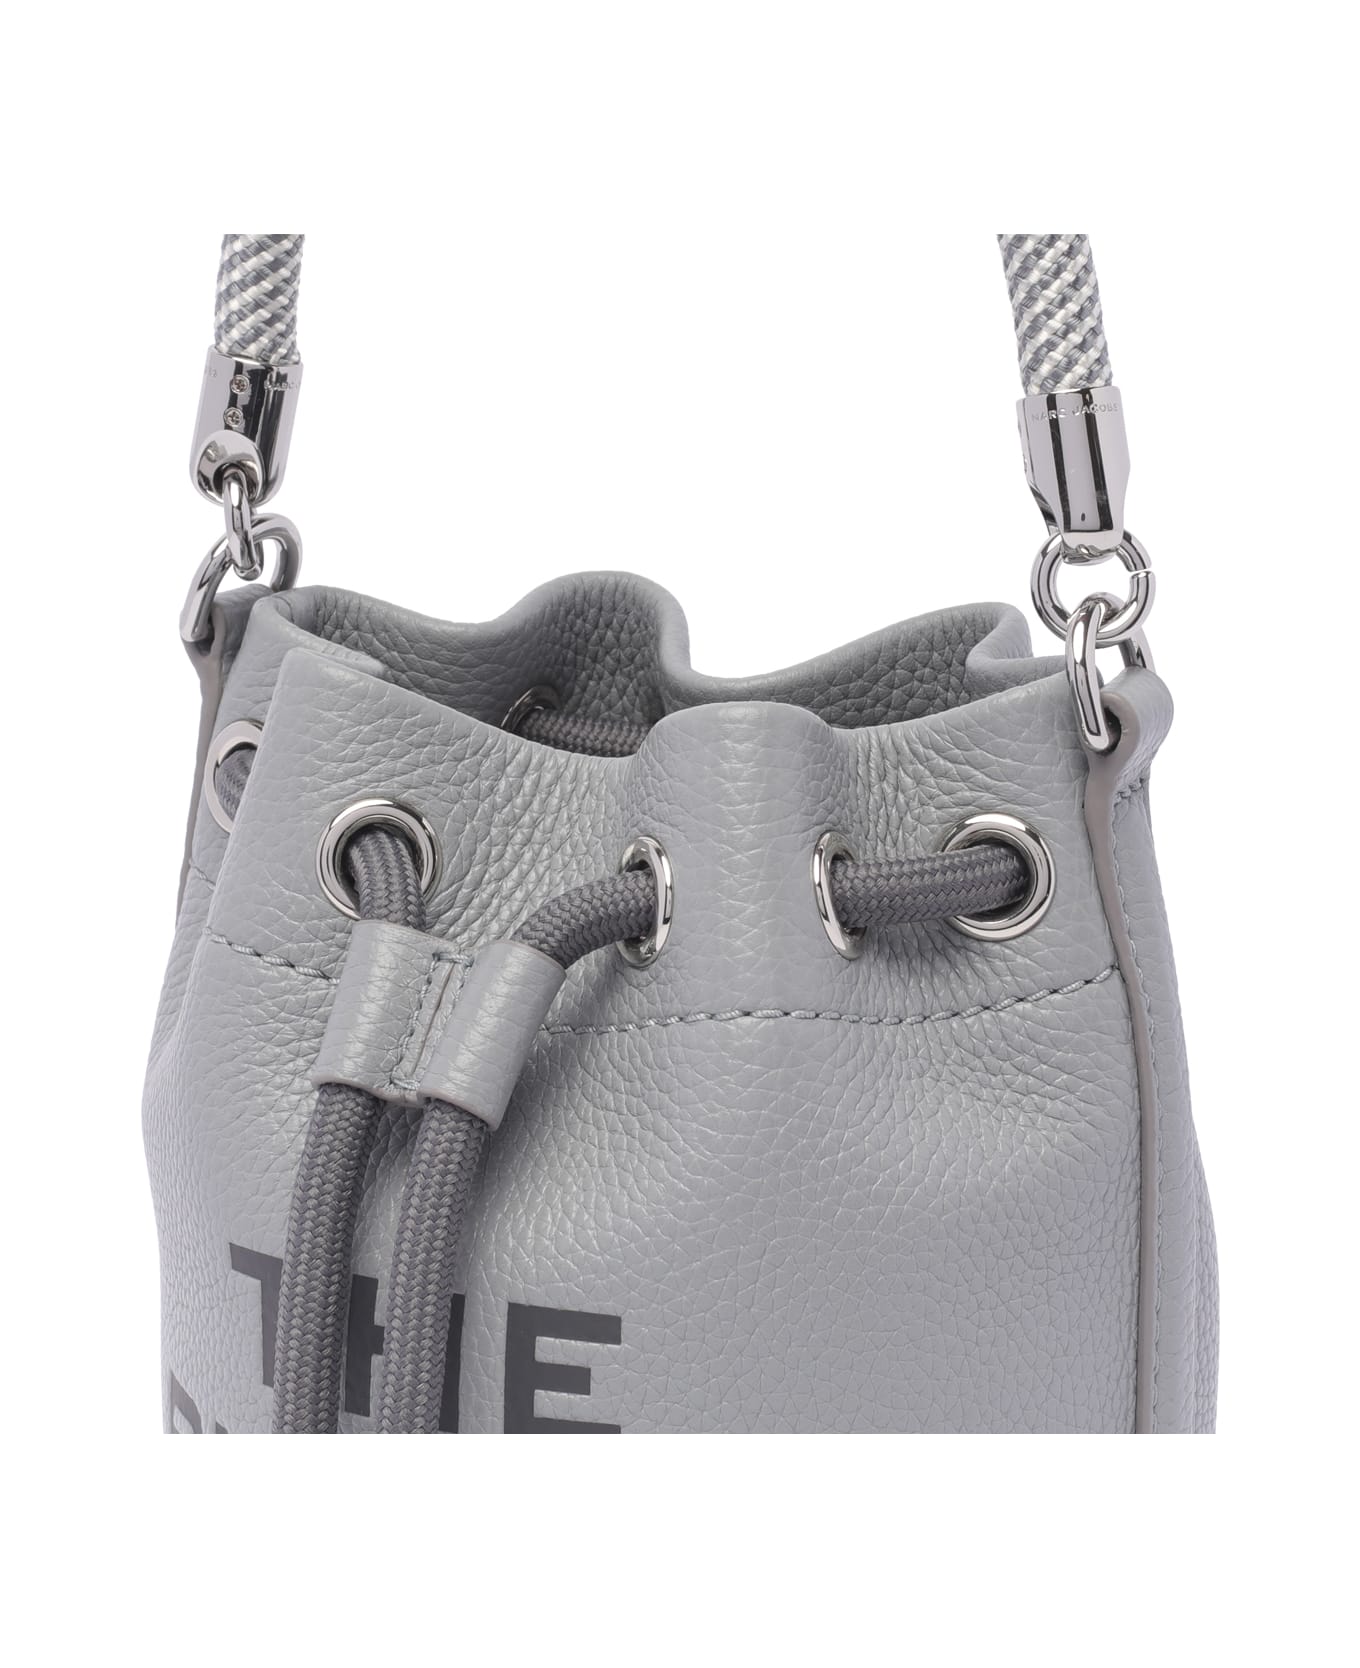 Marc Jacobs The Micro Bucket Bag - GREY トートバッグ